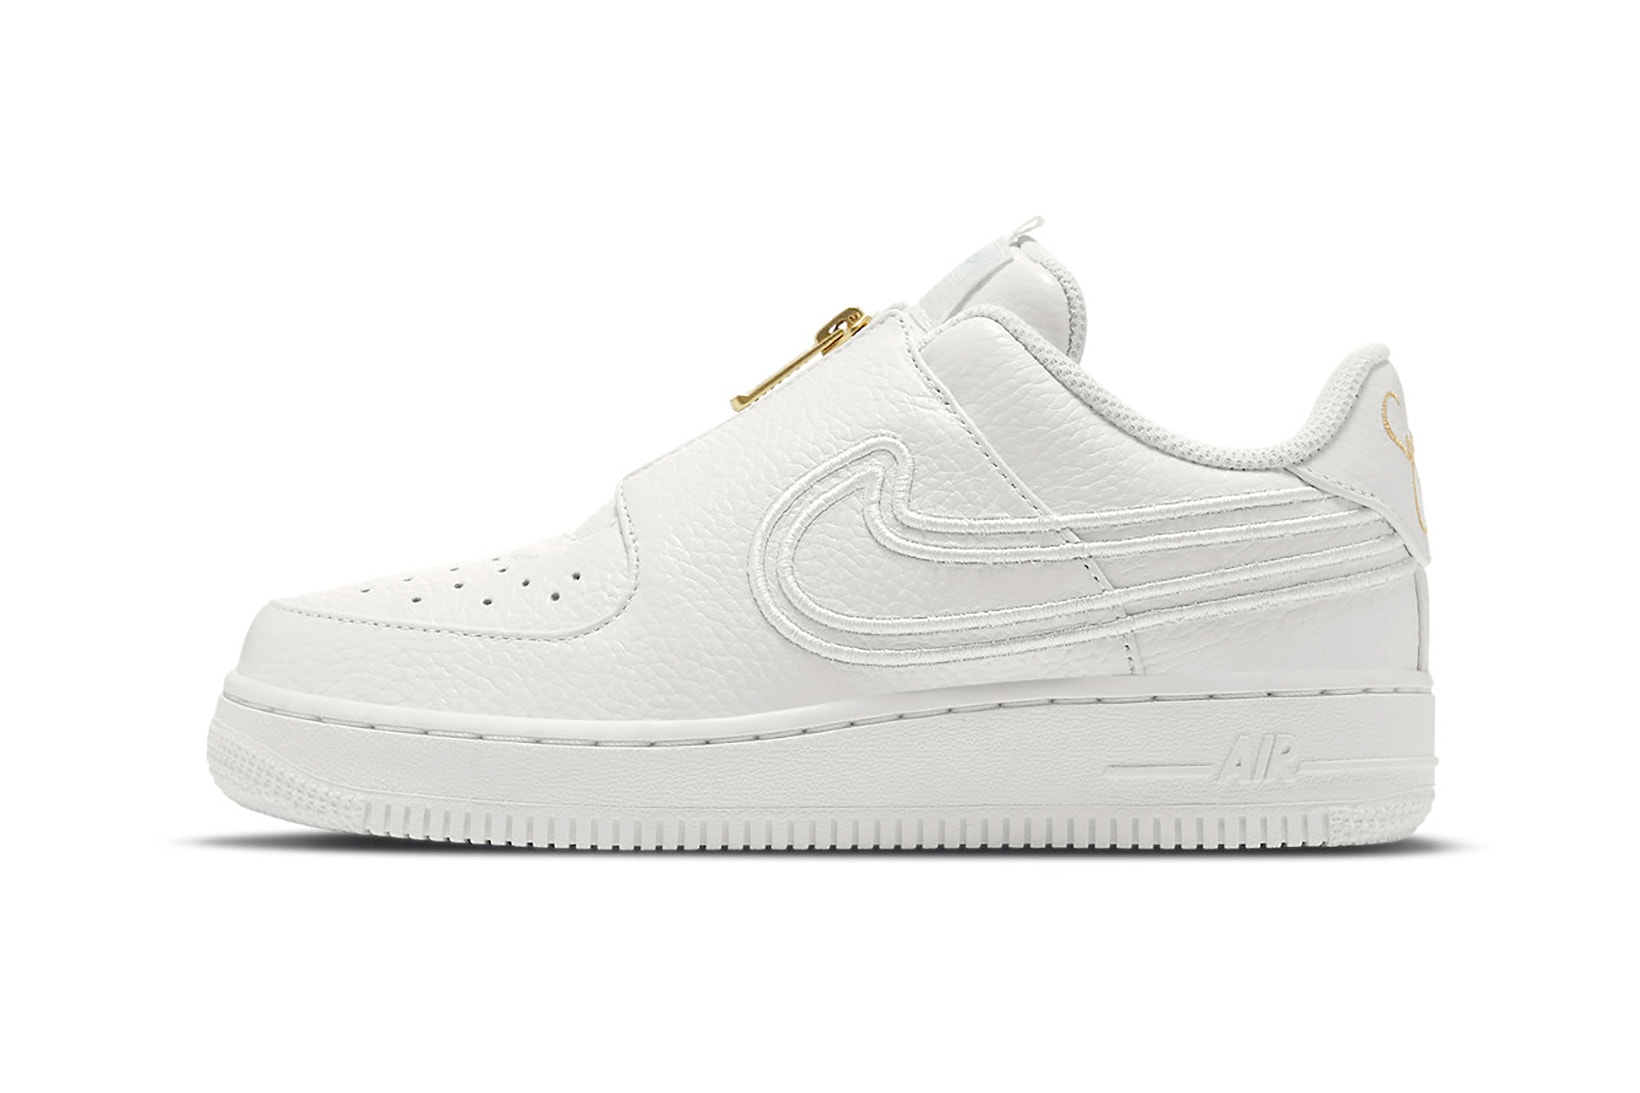 Serena Williams Nike Air Force 1 LXX Zip Sneakers Collaboration Footwear Kicks White Gold Lateral